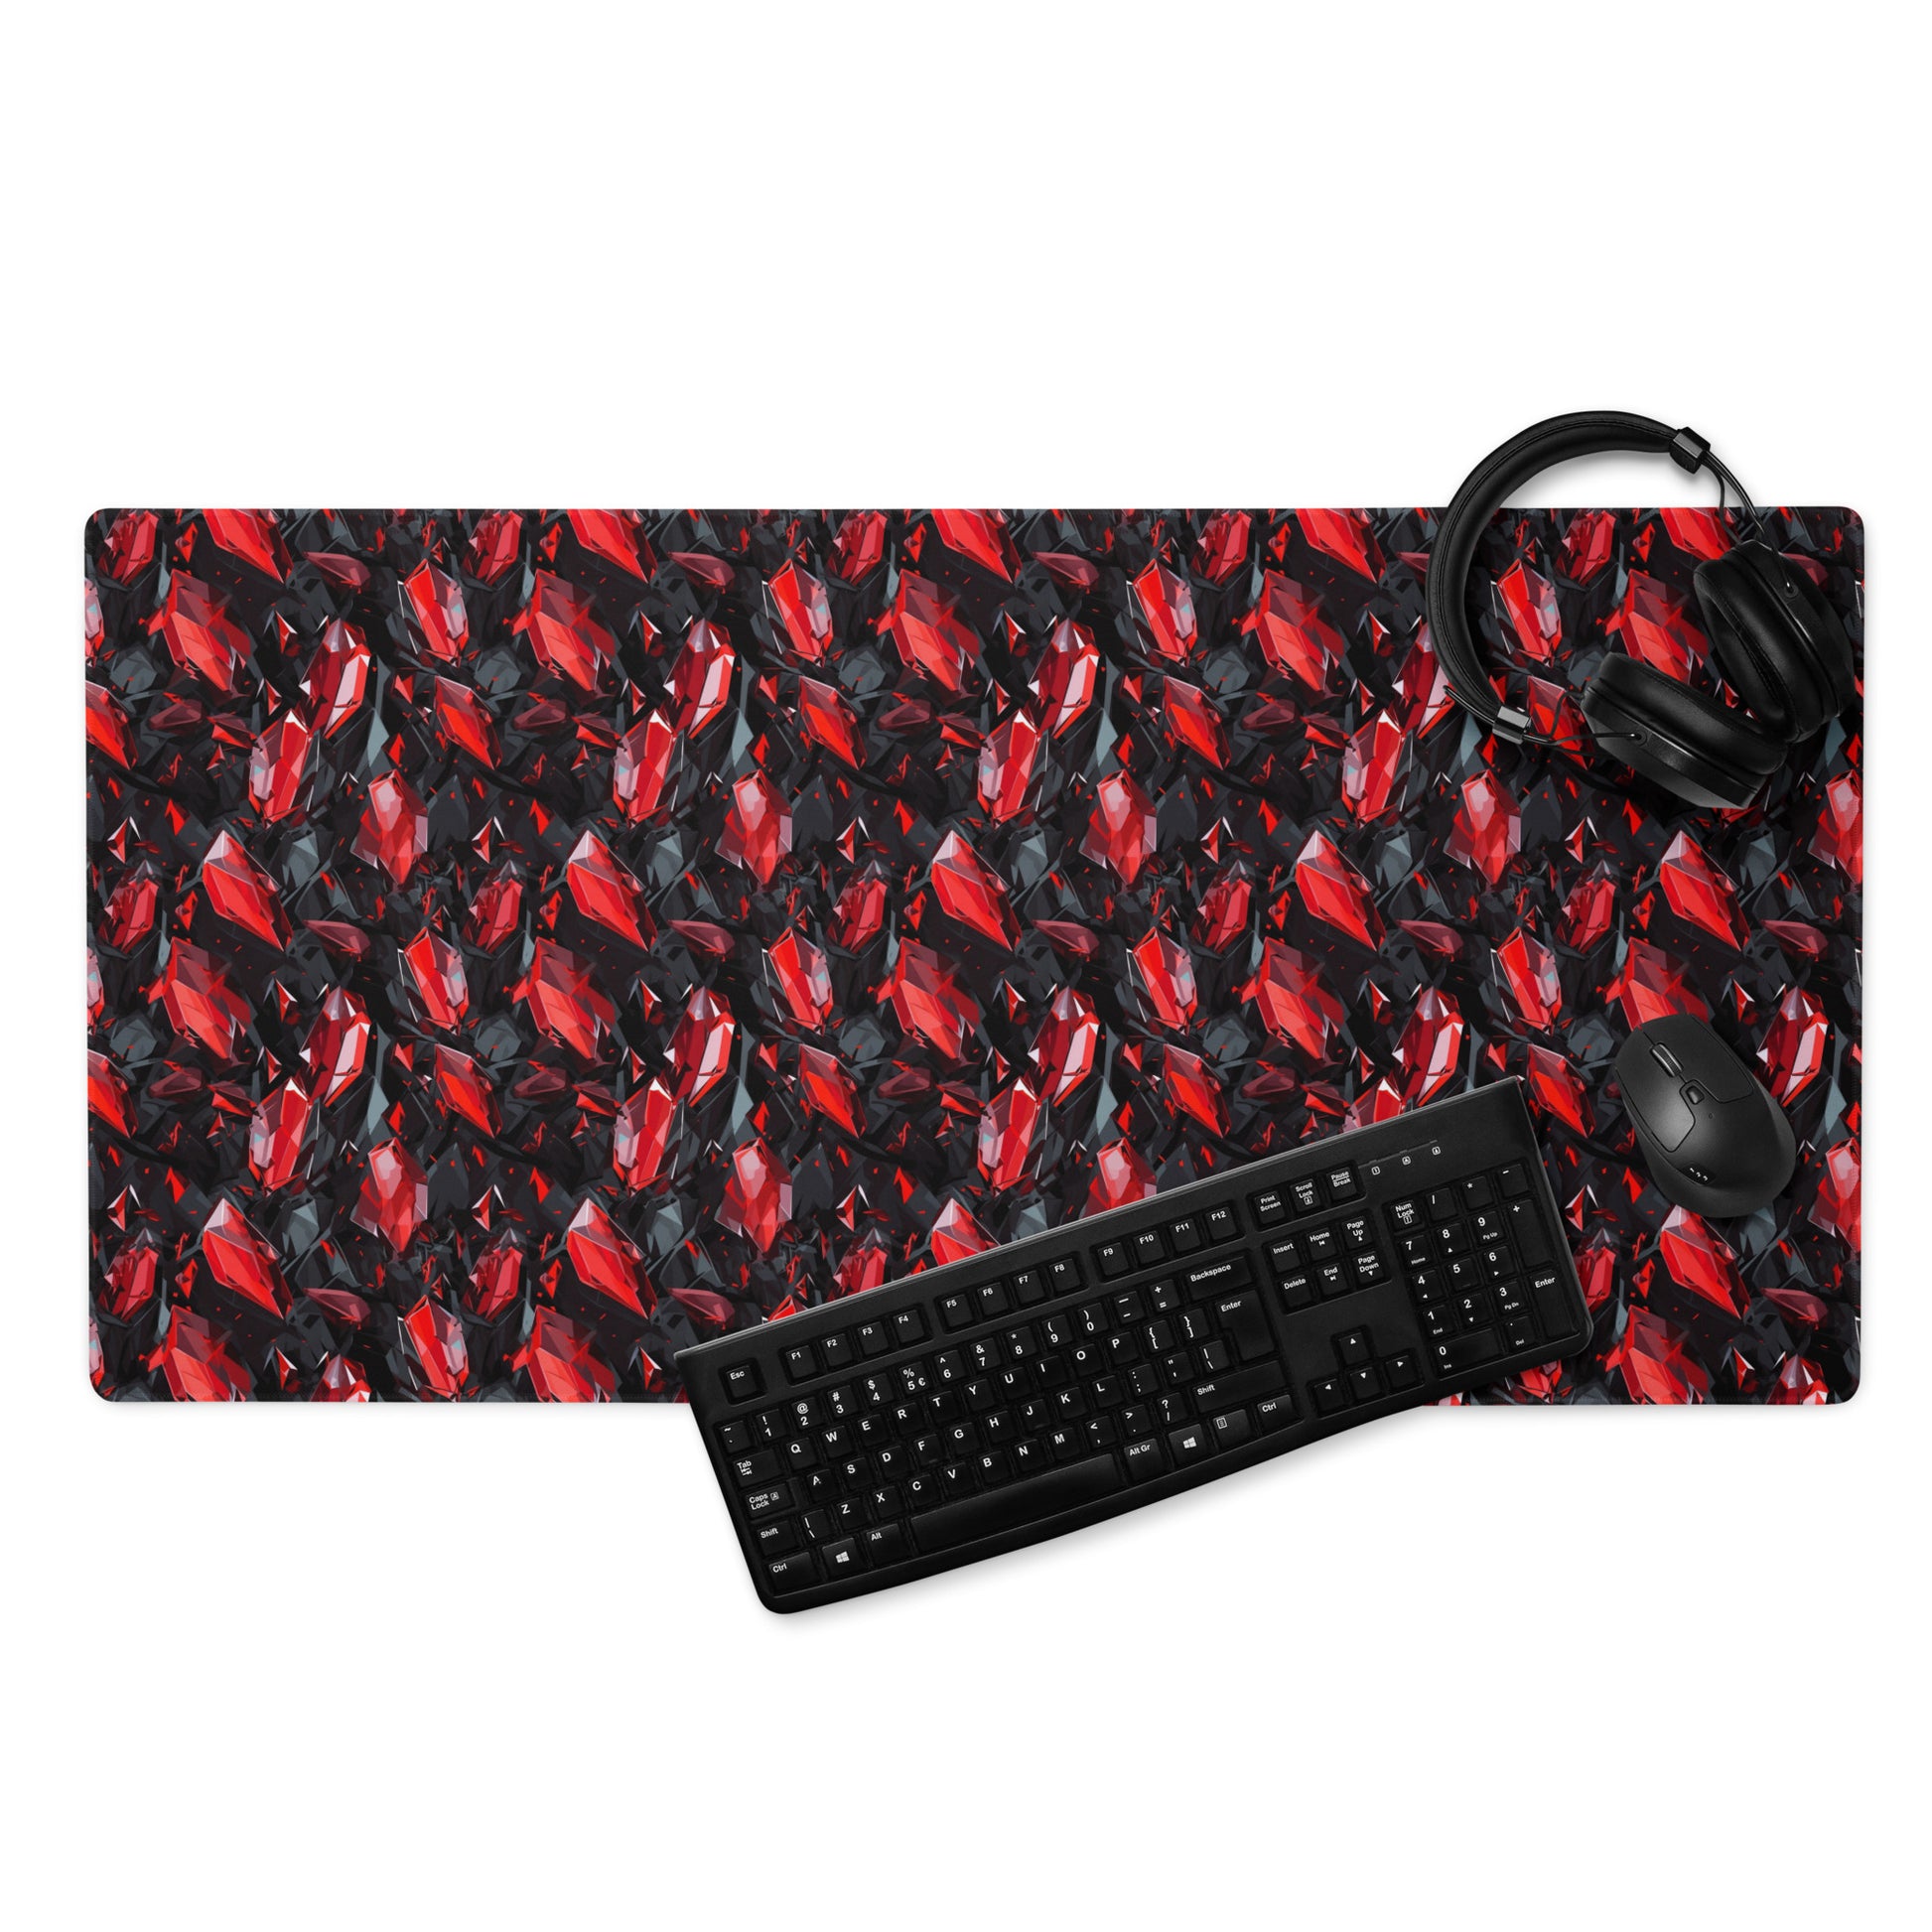 A 36" x 18" gaming desk pad with black and red crystals. A keyboard, mouse, and headphones sit on it.